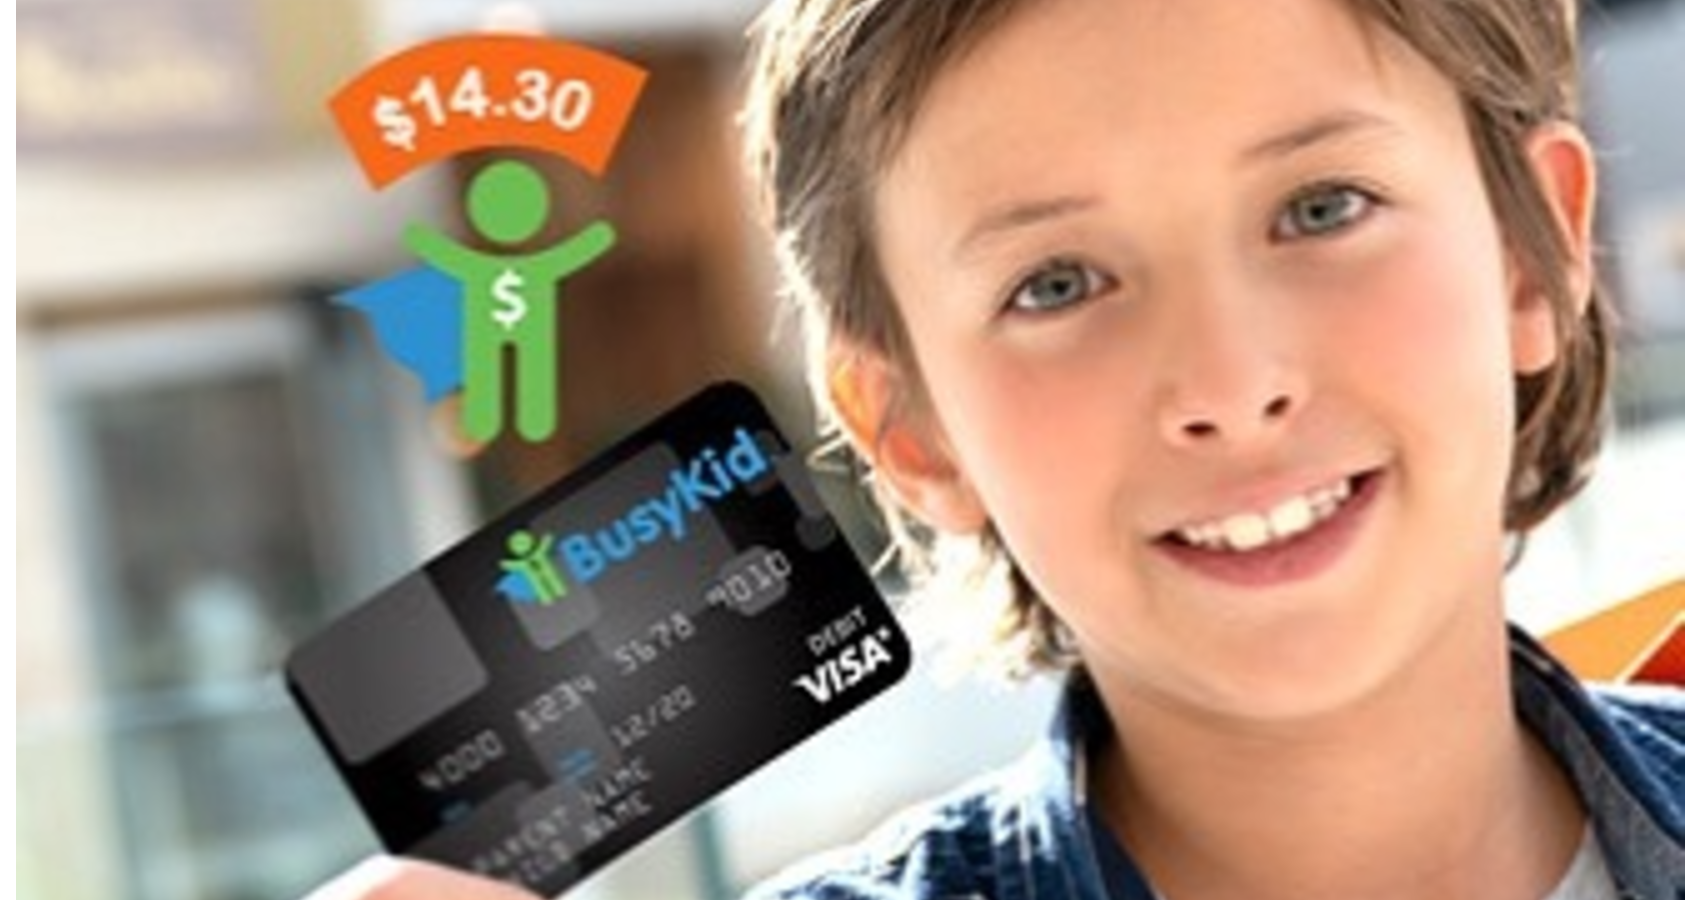 A child holding up a BusyKid card with money they made from chores